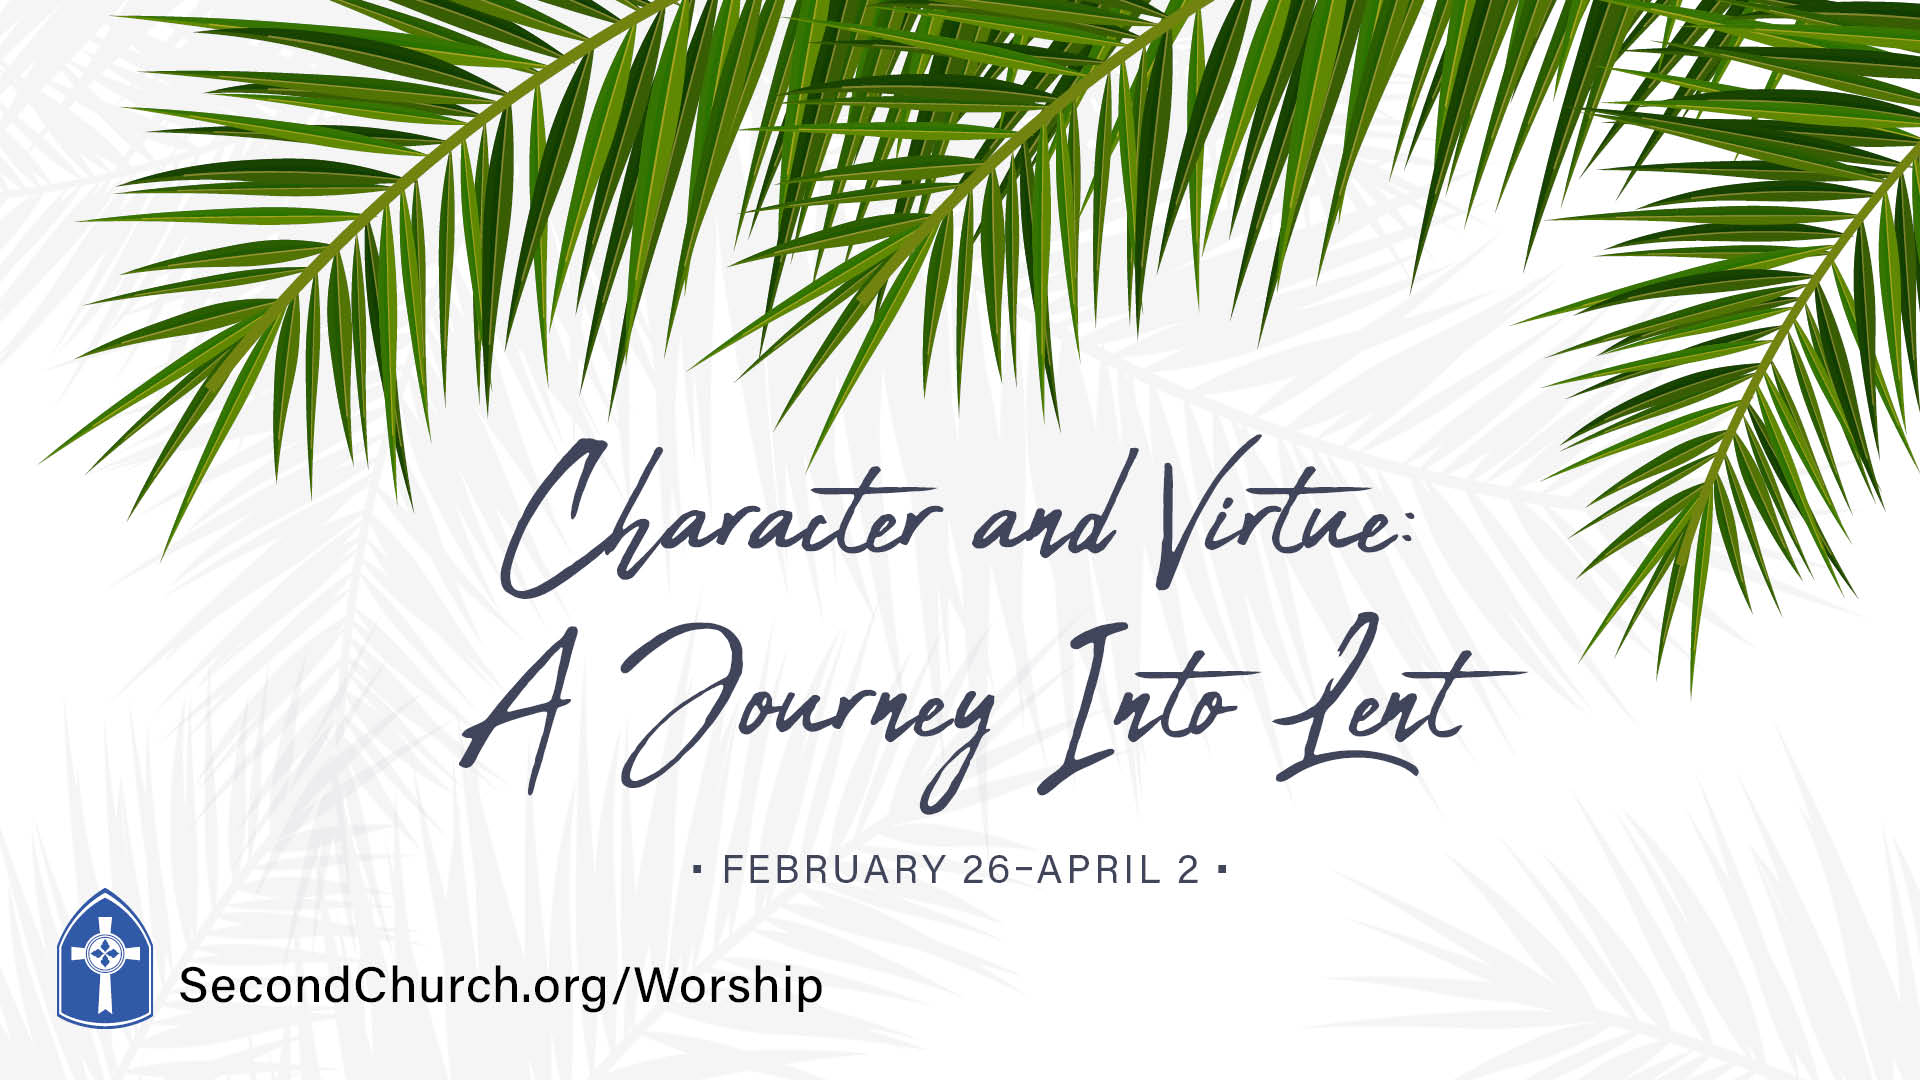 Character and Virtue: A Journey Into Lent